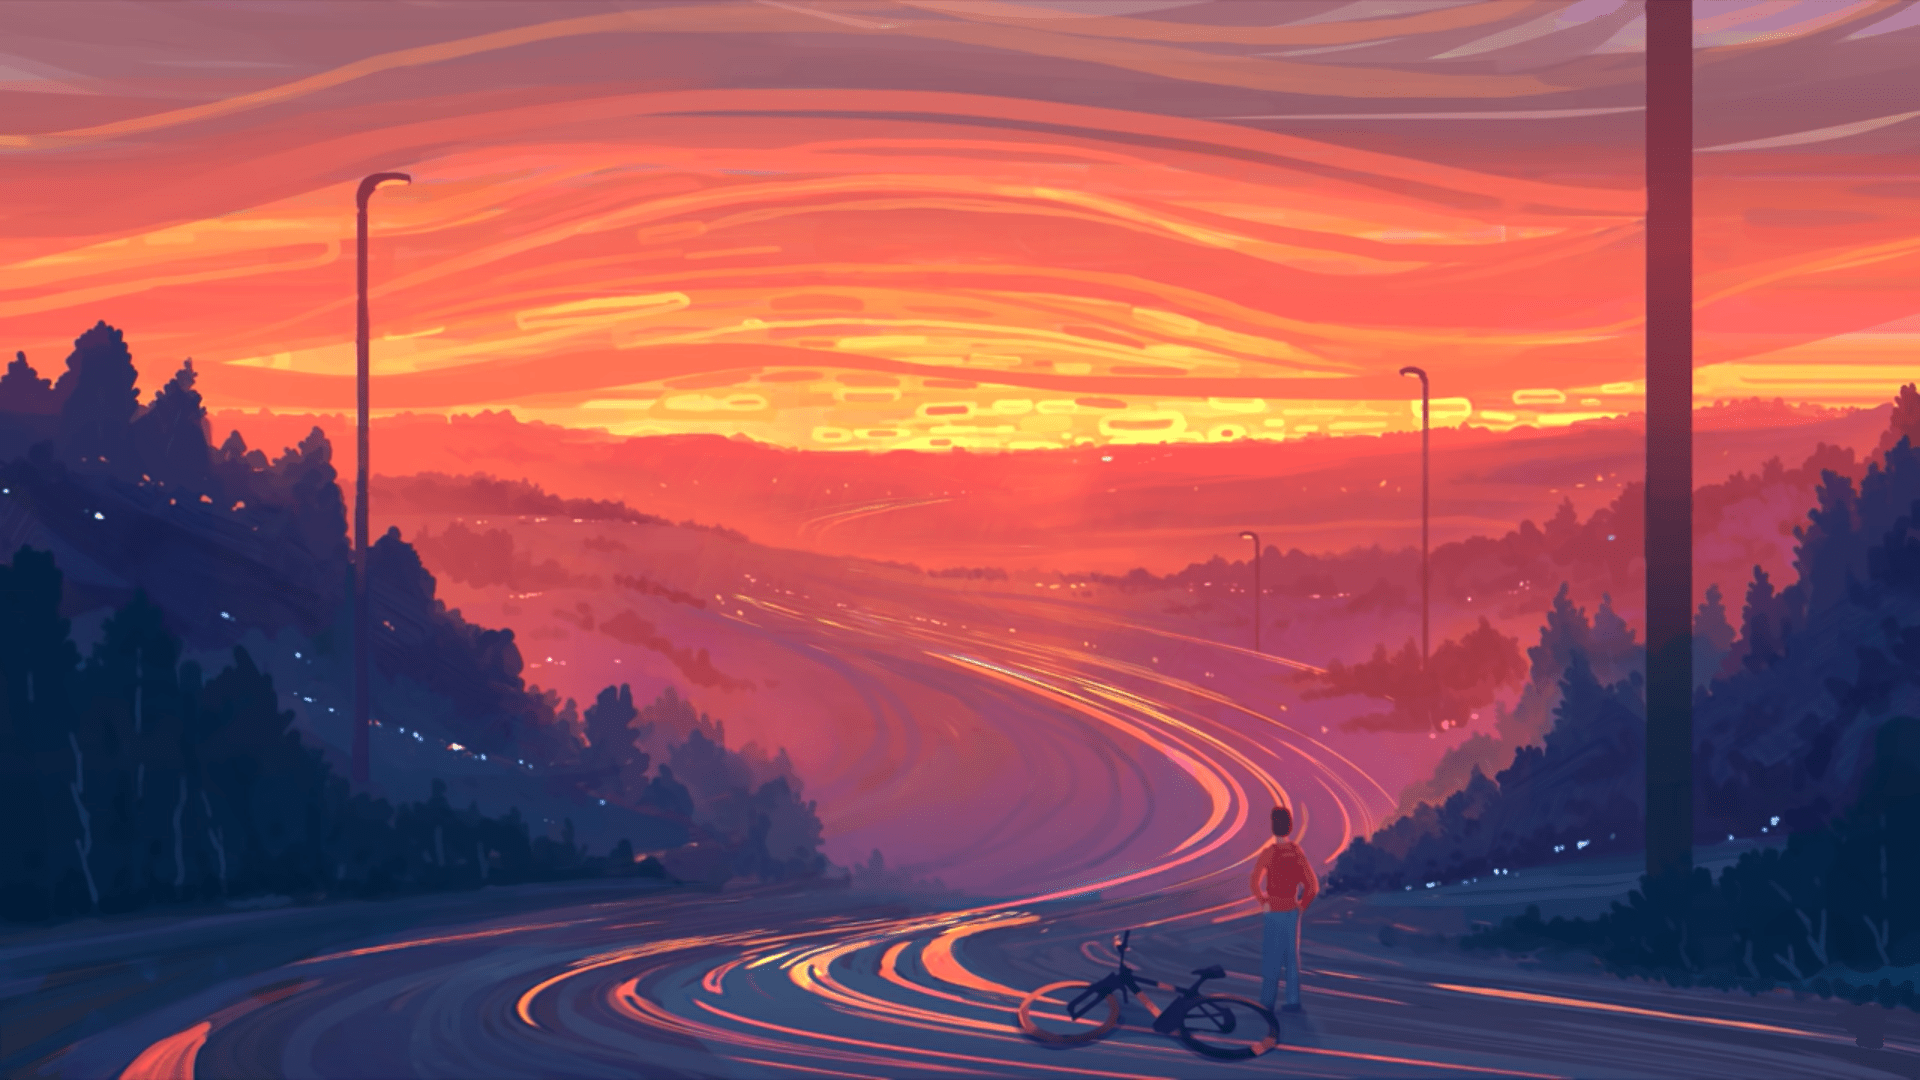 A man riding his bike down the road - Sunset, road